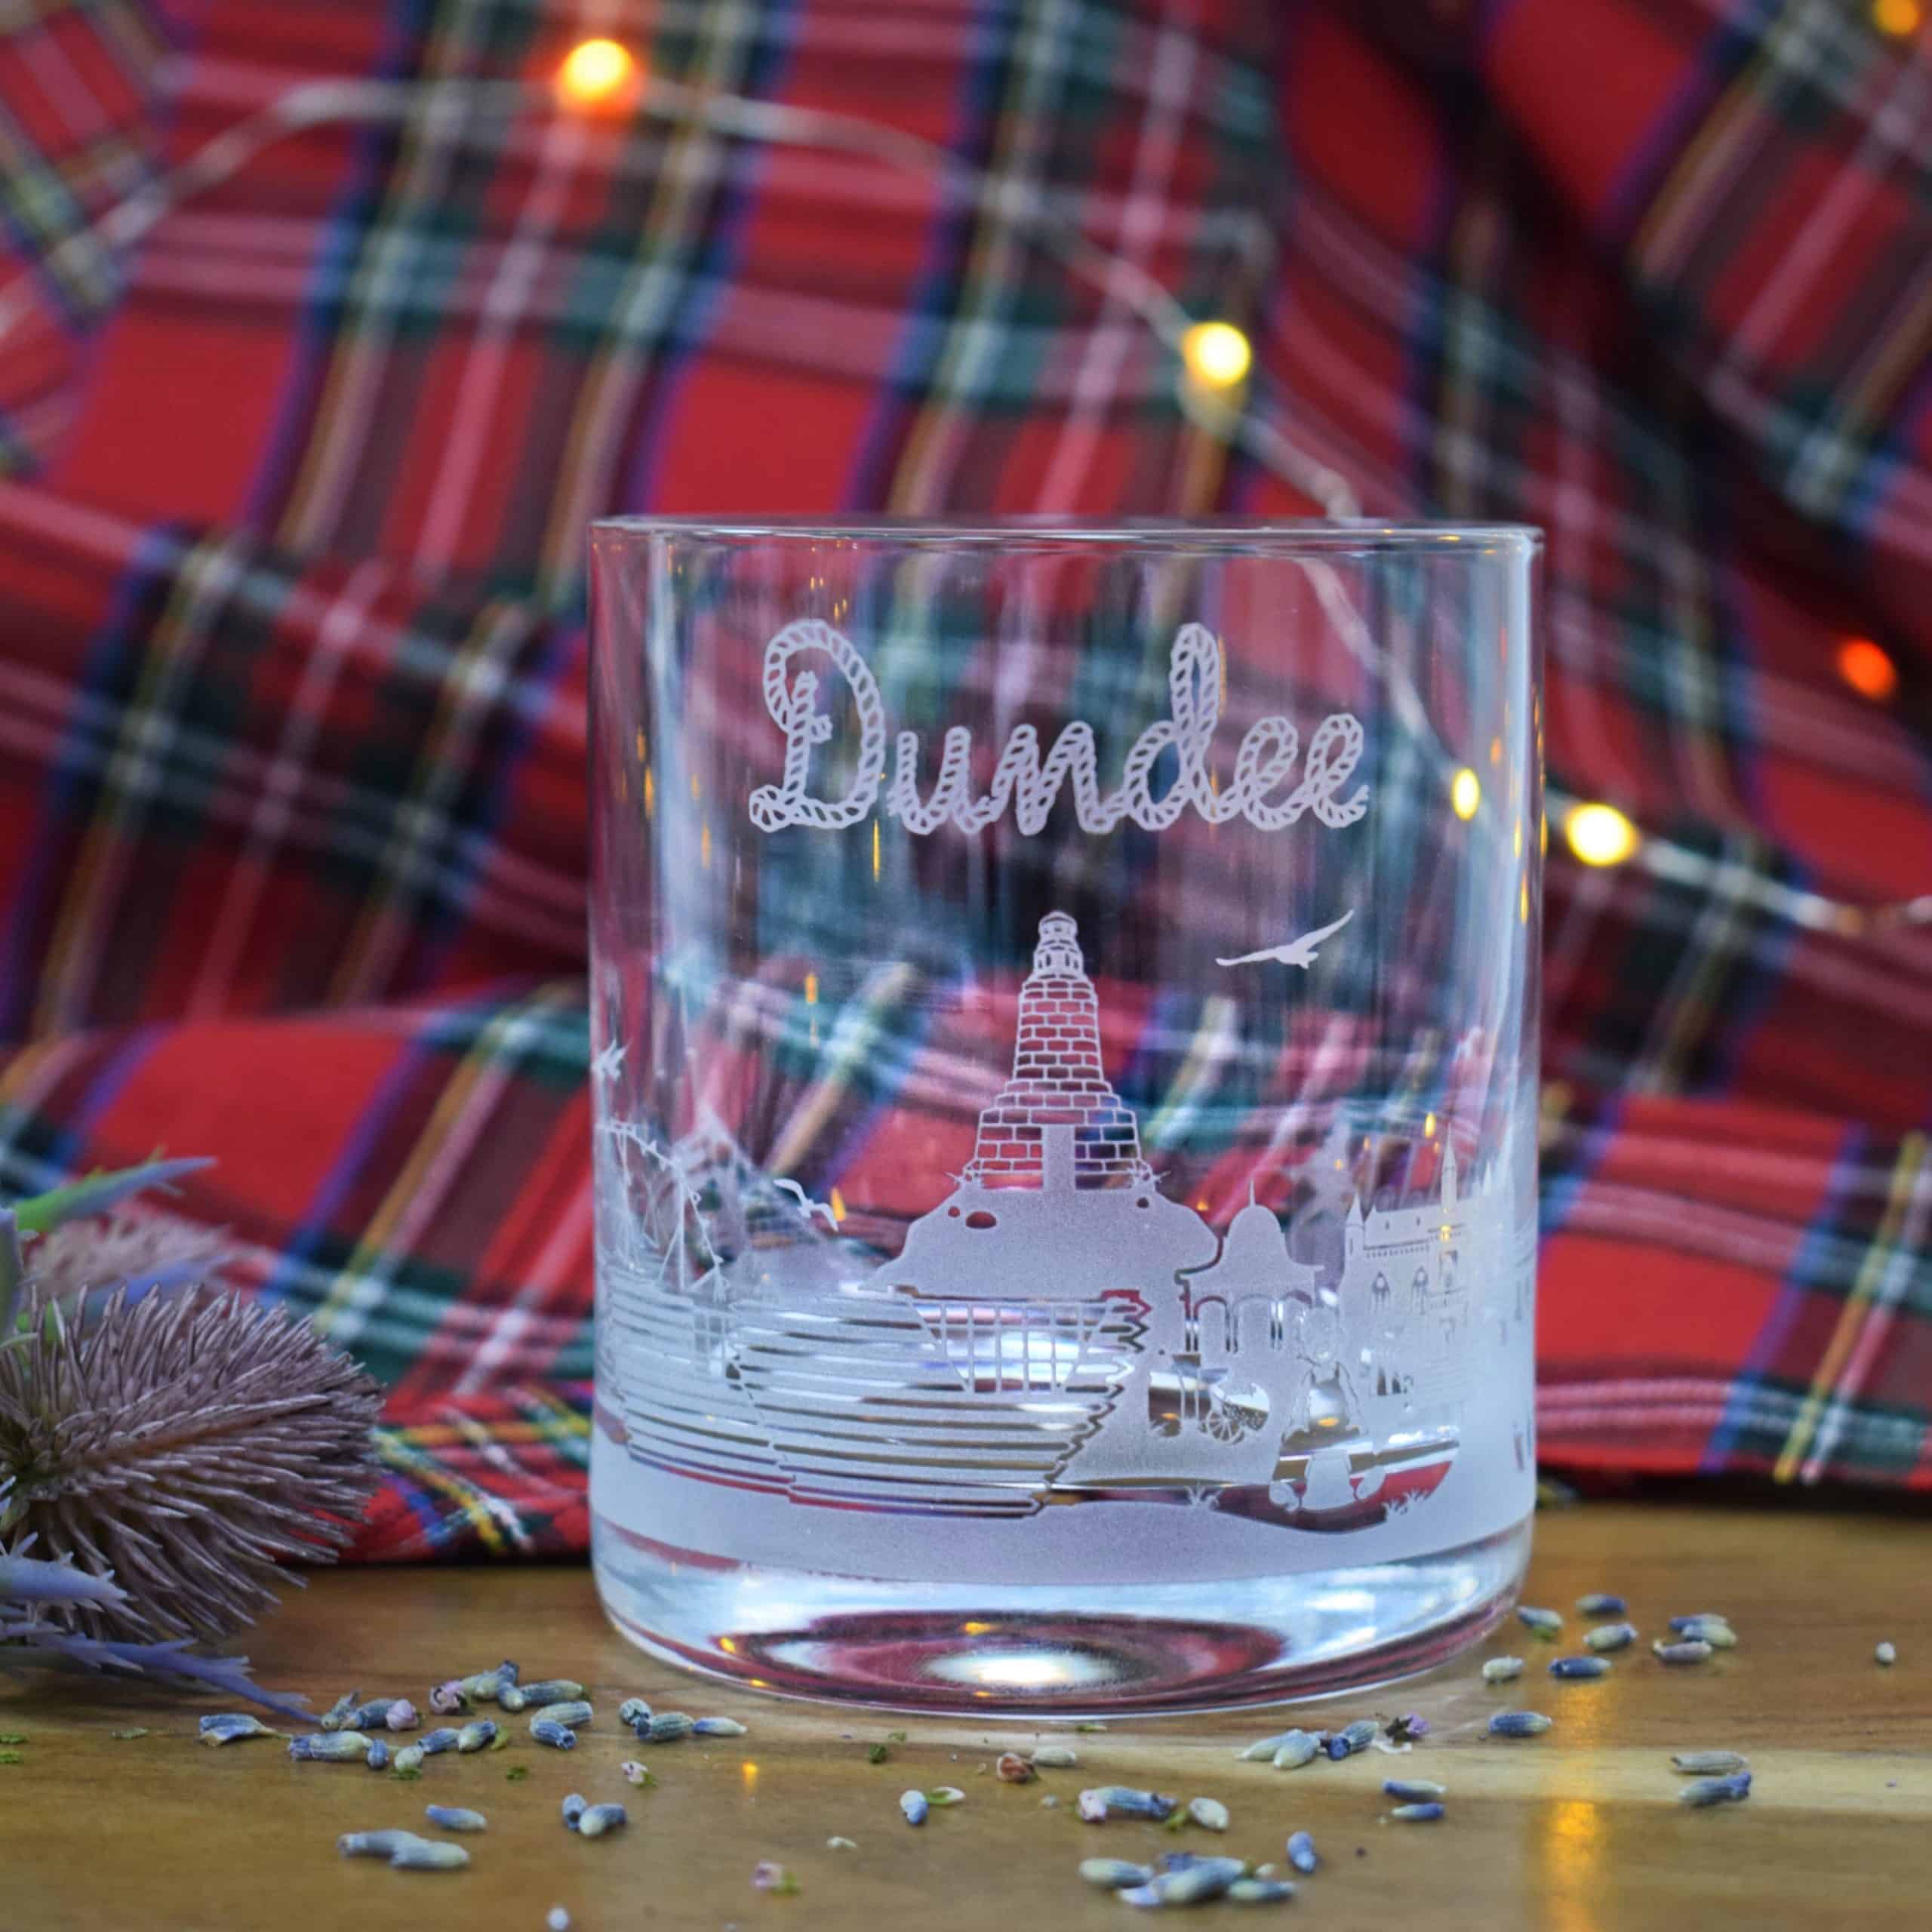 Glencairn Crystal If you’re in need of some Dundee gifts then look no further! This crystal tumbler features a picturesque Dundee skyline design wrapped around the glass. It can be used for any beverage from water to whisky and is supplied in a Glencairn Crystal windowed carton, perfect for gifting.